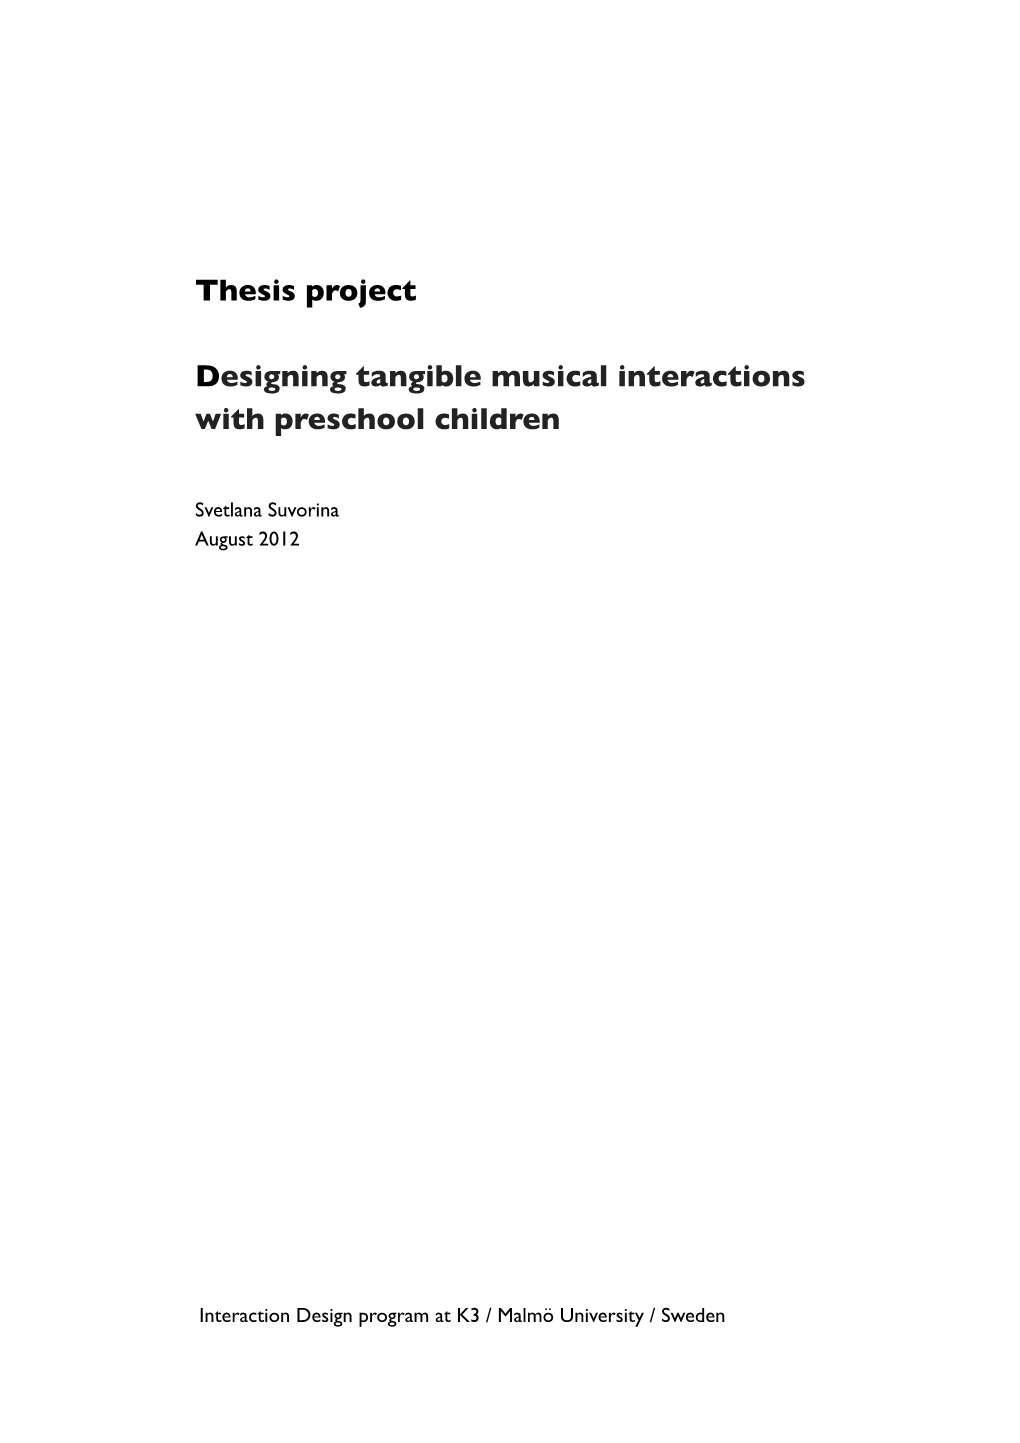 Thesis Project Designing Tangible Musical Interactions with Preschool